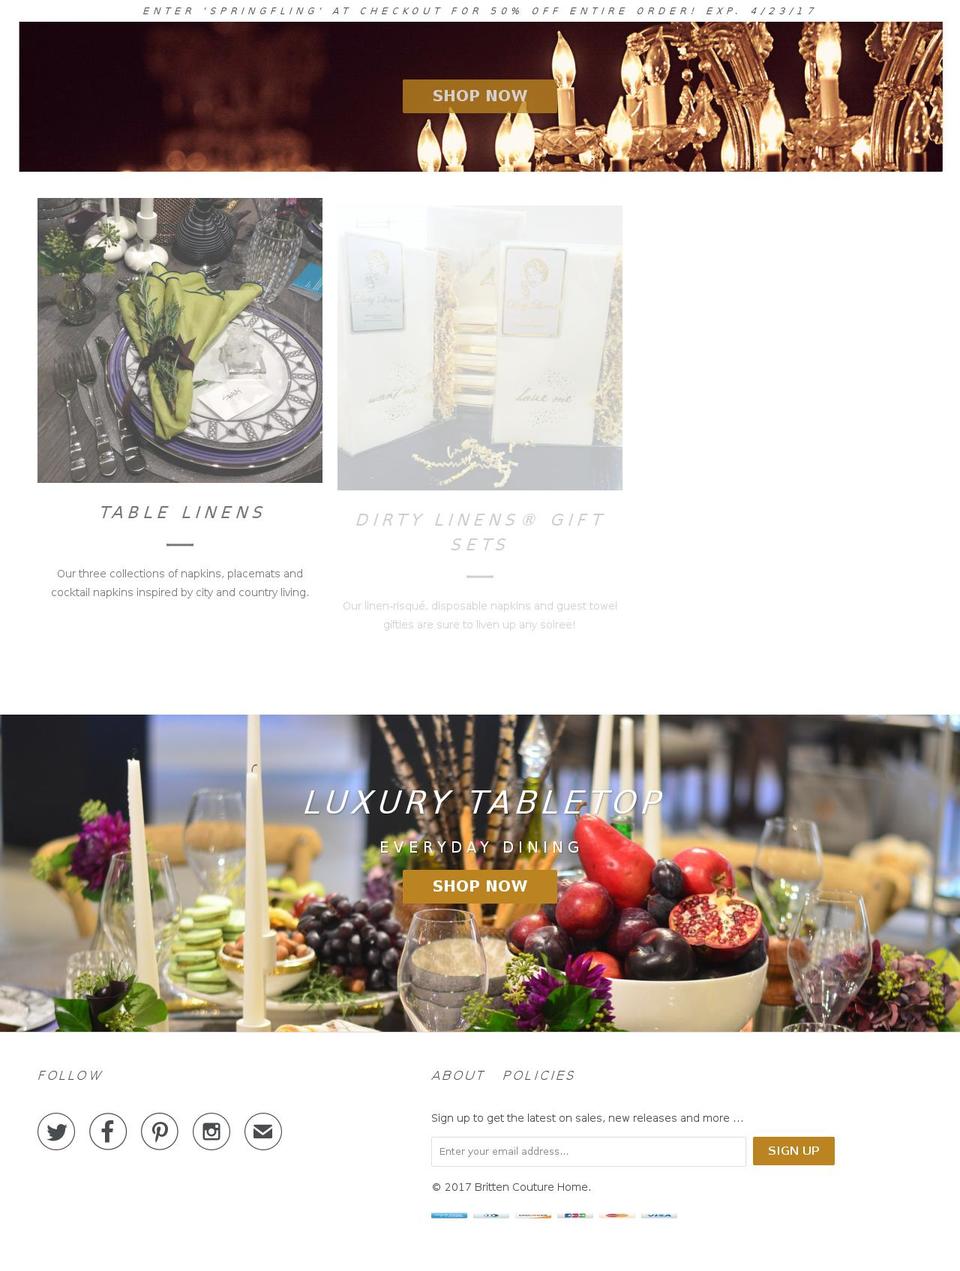 Live Shopify theme site example brittencouturehome.com